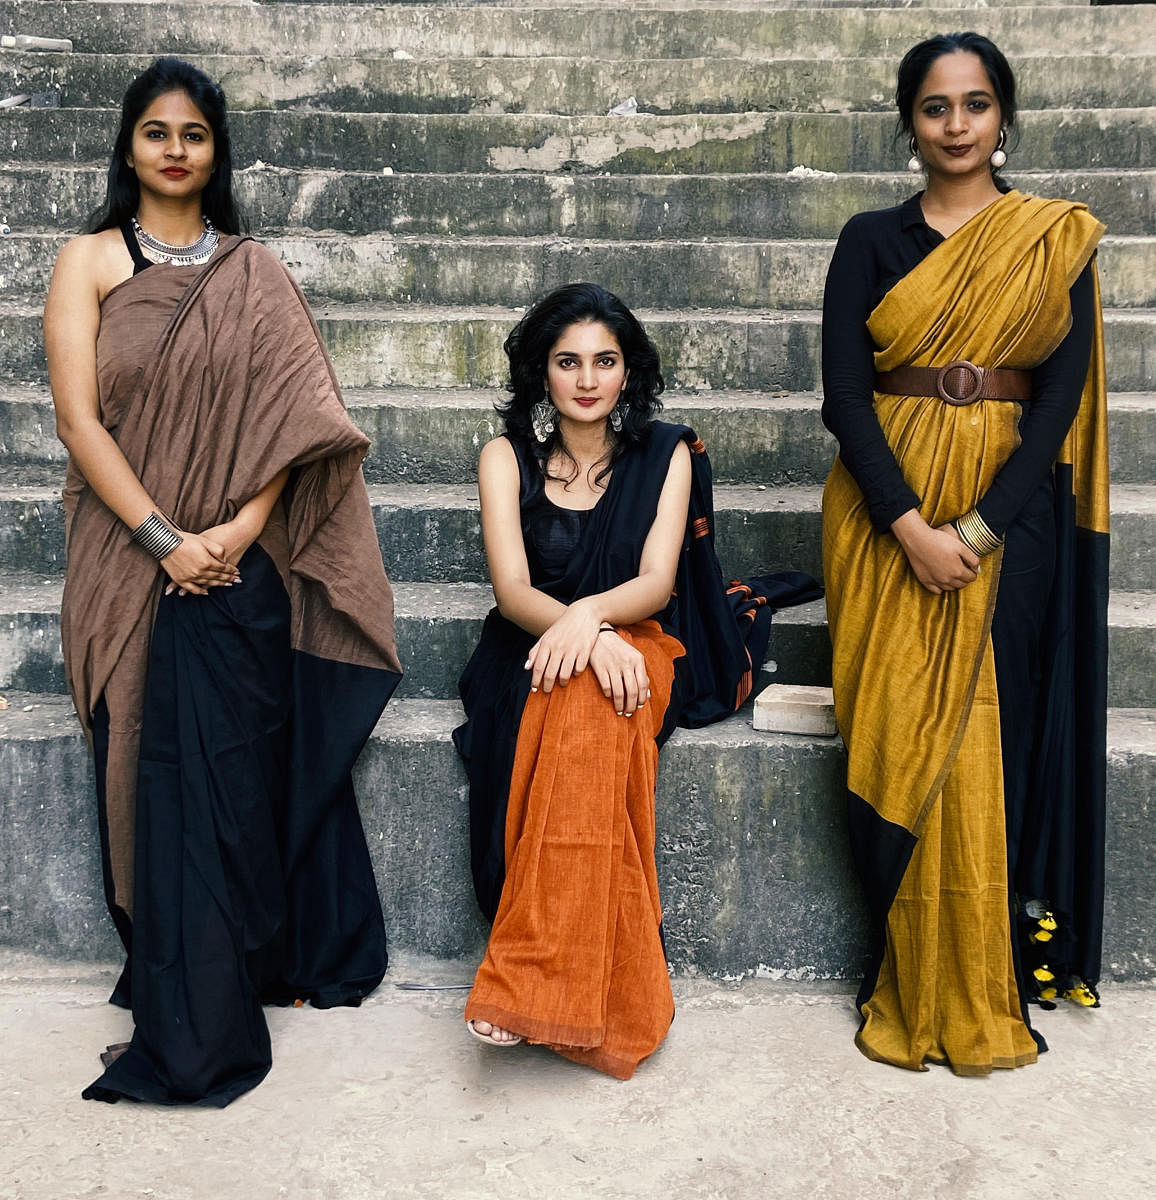 I Am Rural’s summer collection includes saris made from cotton and jute.